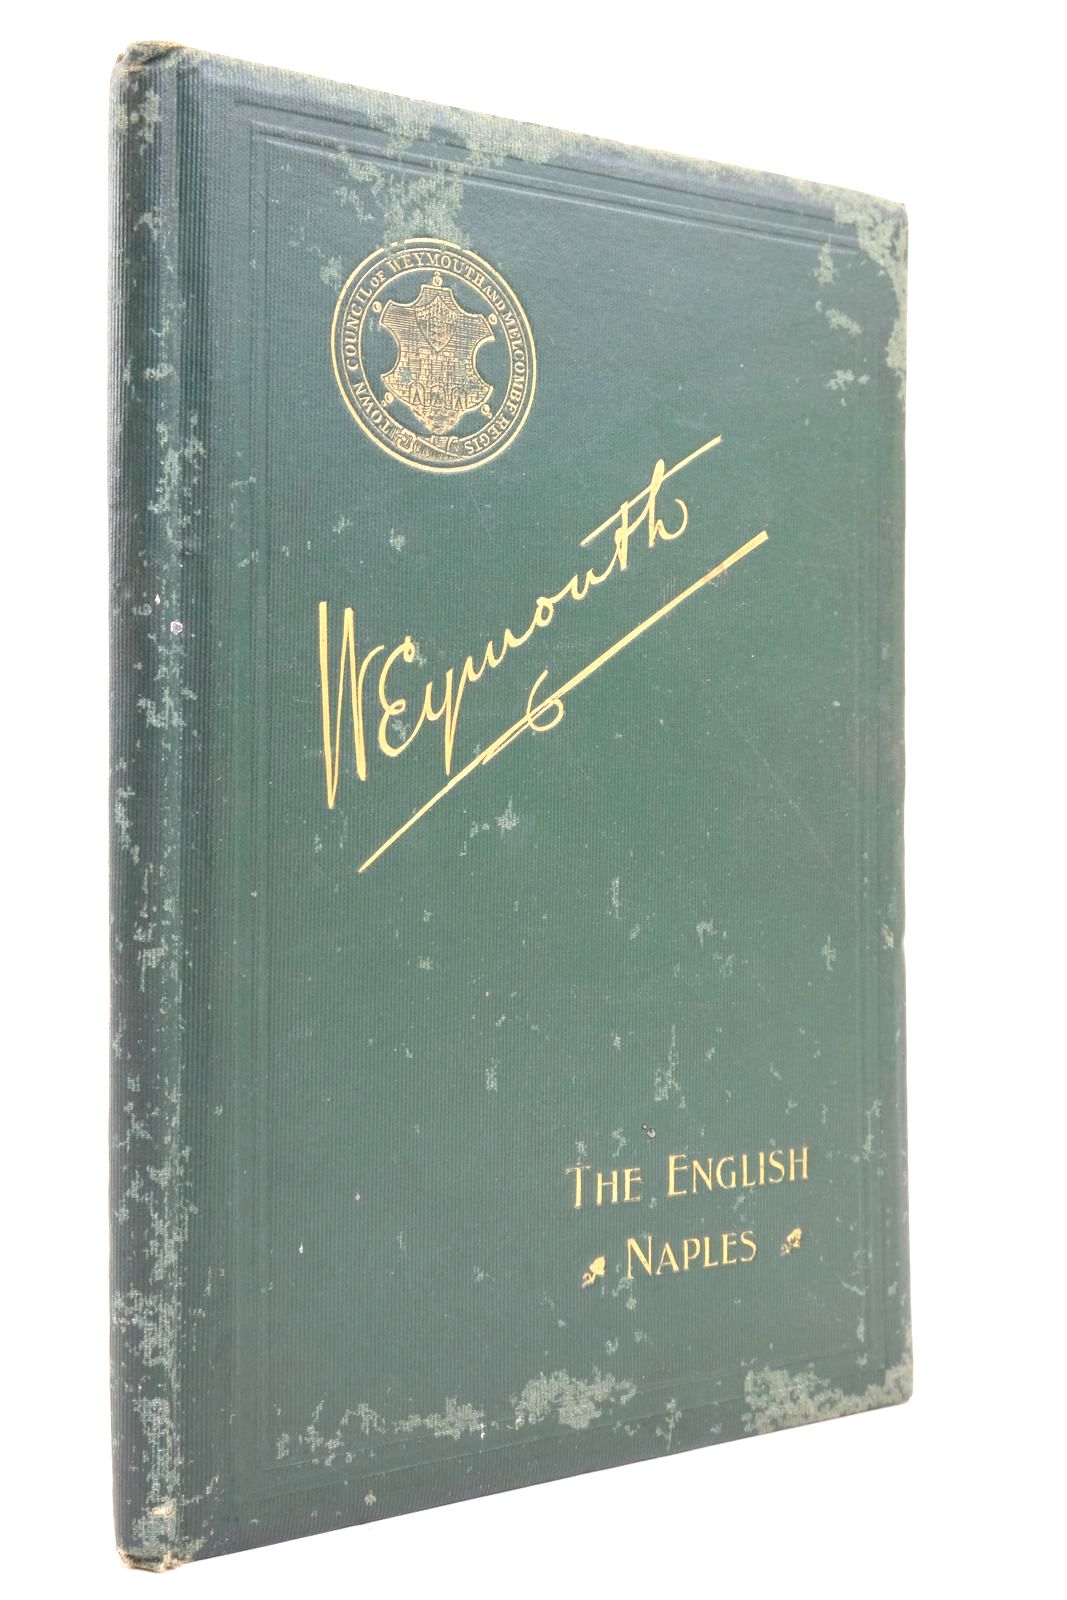 Photo of WEYMOUTH THE ENGLISH NAPLES published by Hood &amp; Co. Limited (STOCK CODE: 2137656)  for sale by Stella & Rose's Books